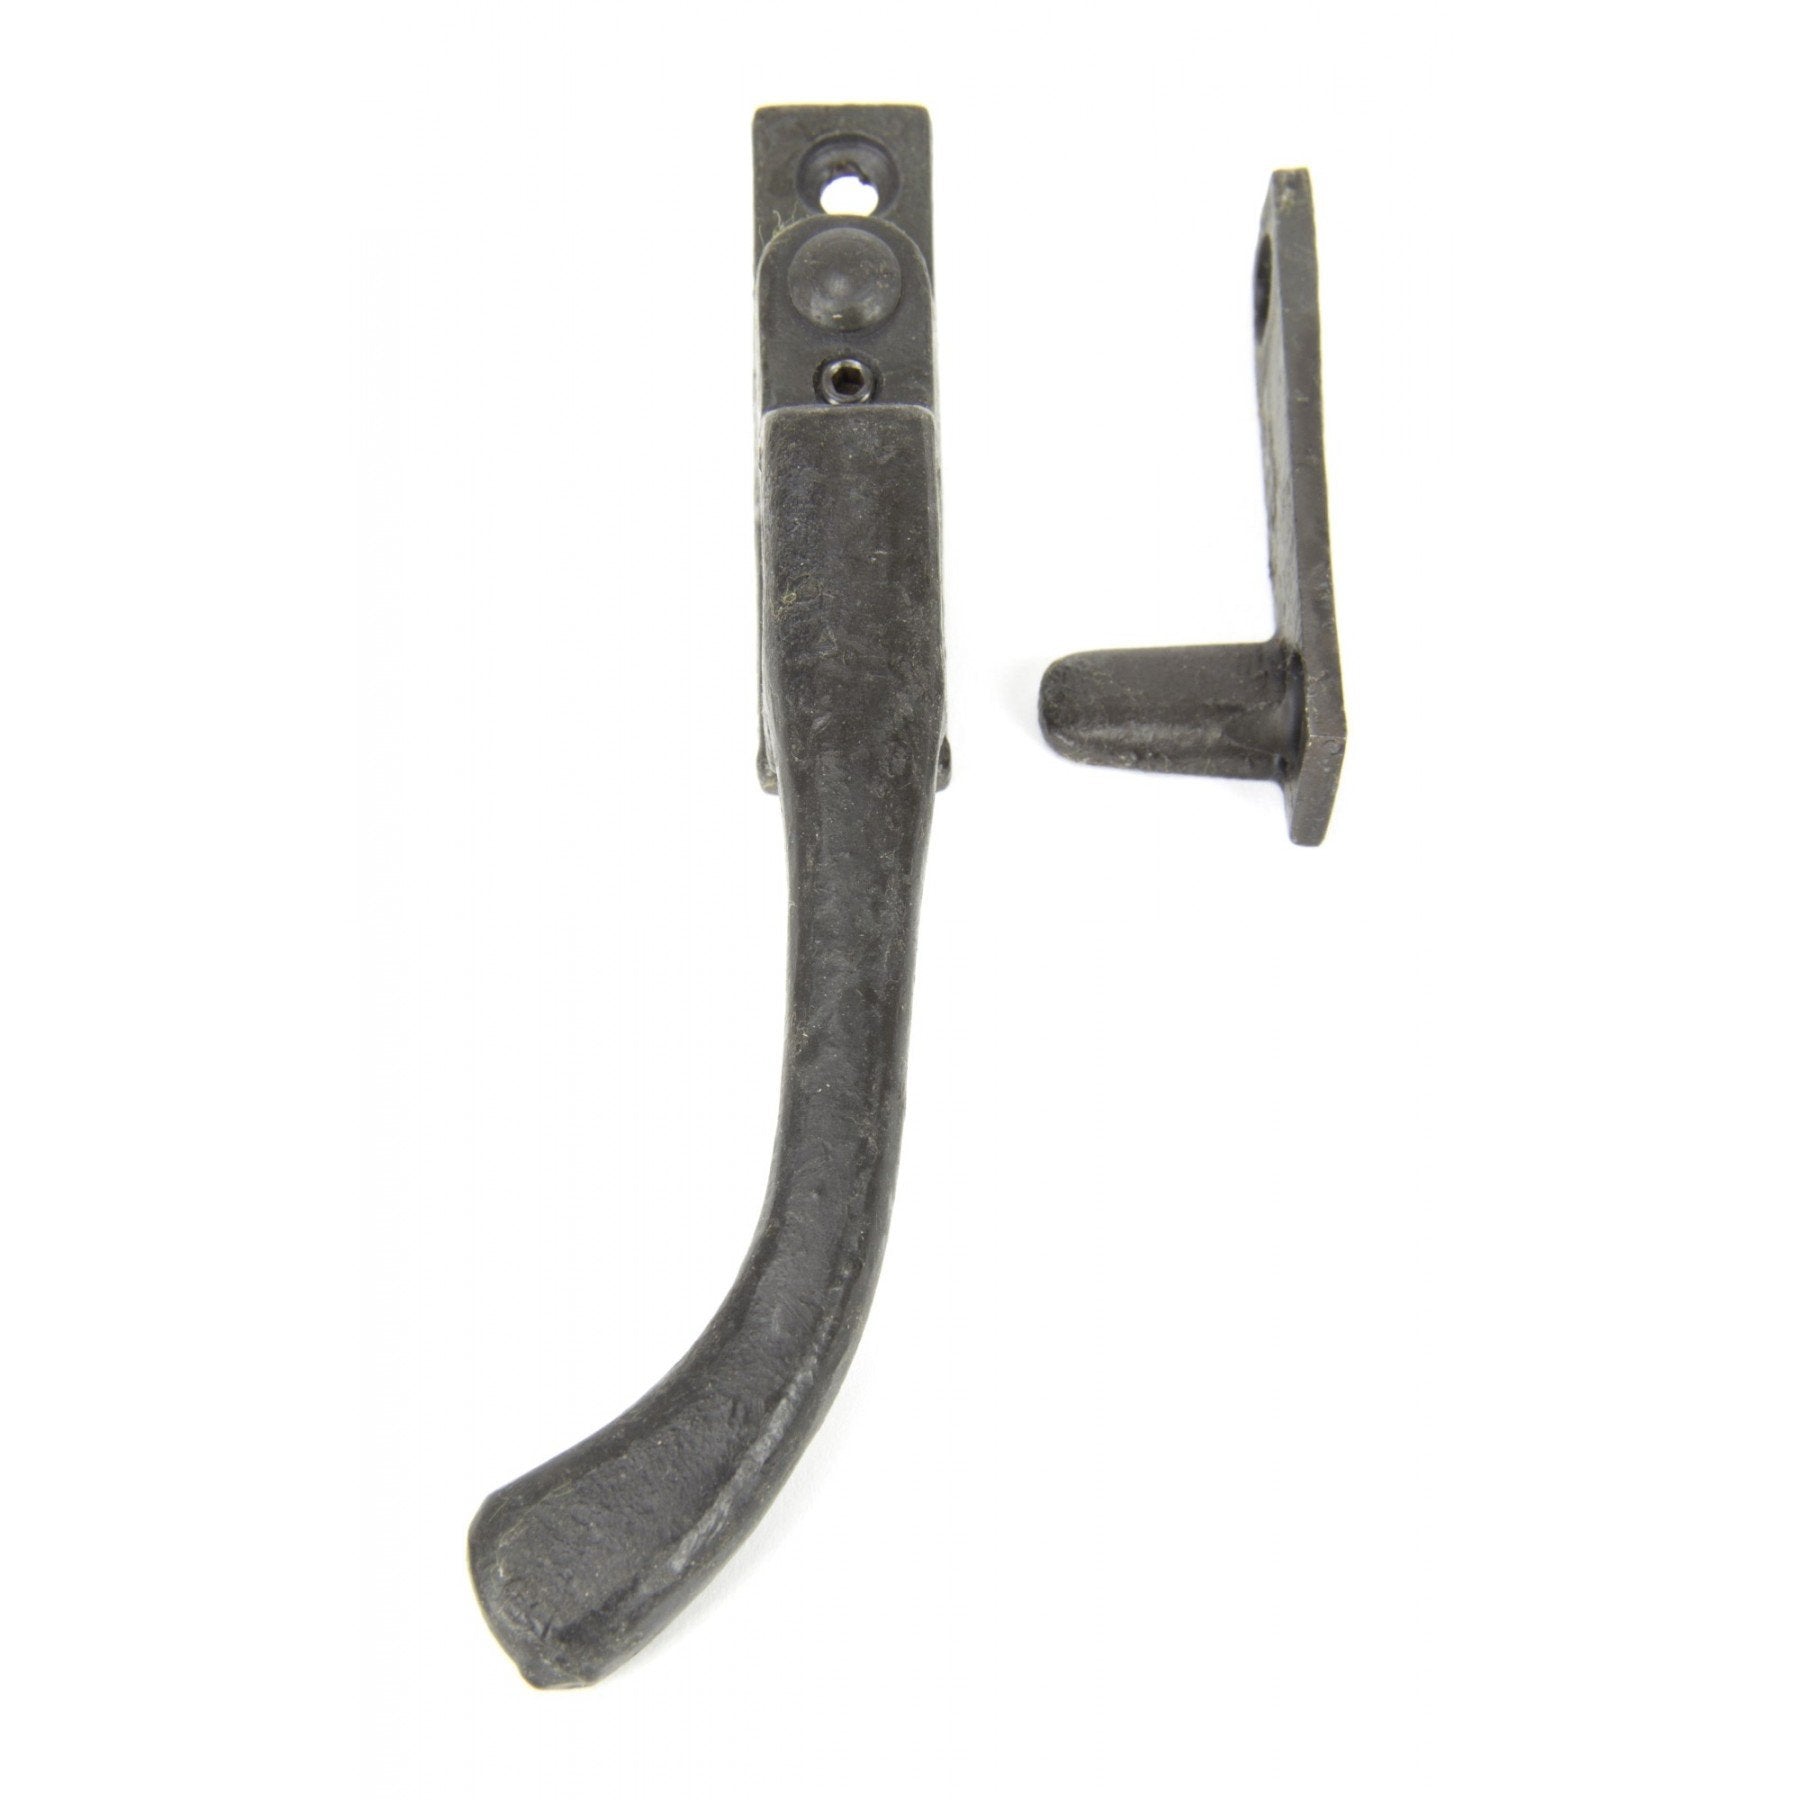 From the Anvil Beeswax Night Vent Fastener LH - Locking